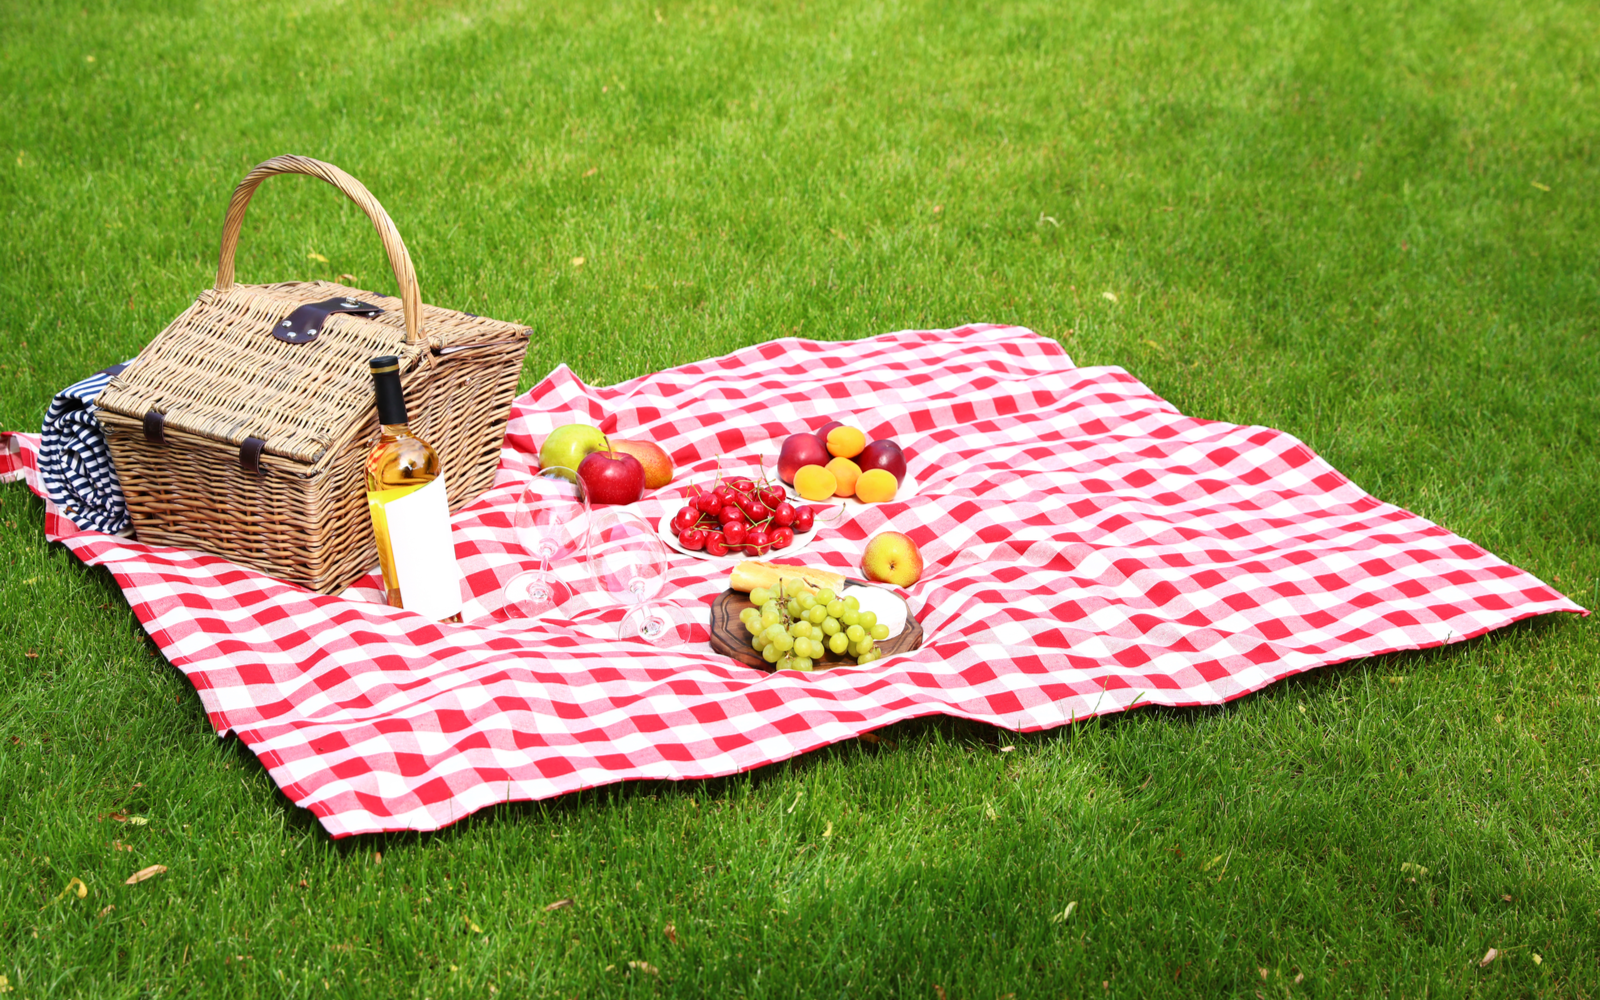 Picnic basket and fruit and wine on one of the best picnic blankets that is spread out on freshly mowed grass